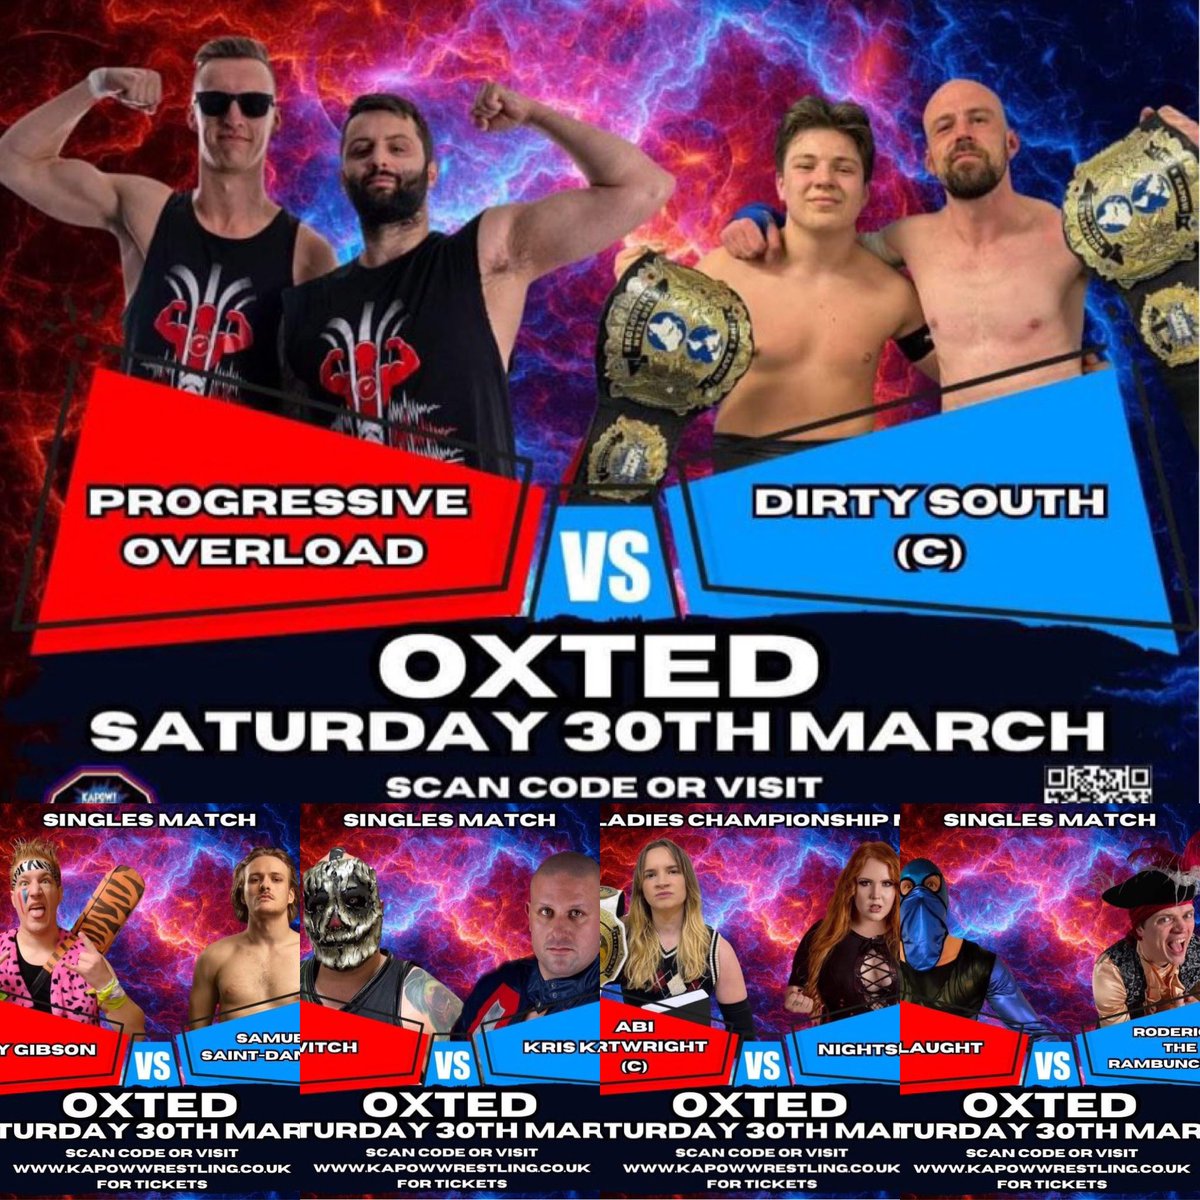 #tonight in #oxted #surrey we’ve got a stacked line up for you! The main event will see Dirty South defend their tag team championships against Progressive Overload. #wrestling #wrestler #familyfun #wwe #wrestlemania #aew #tna